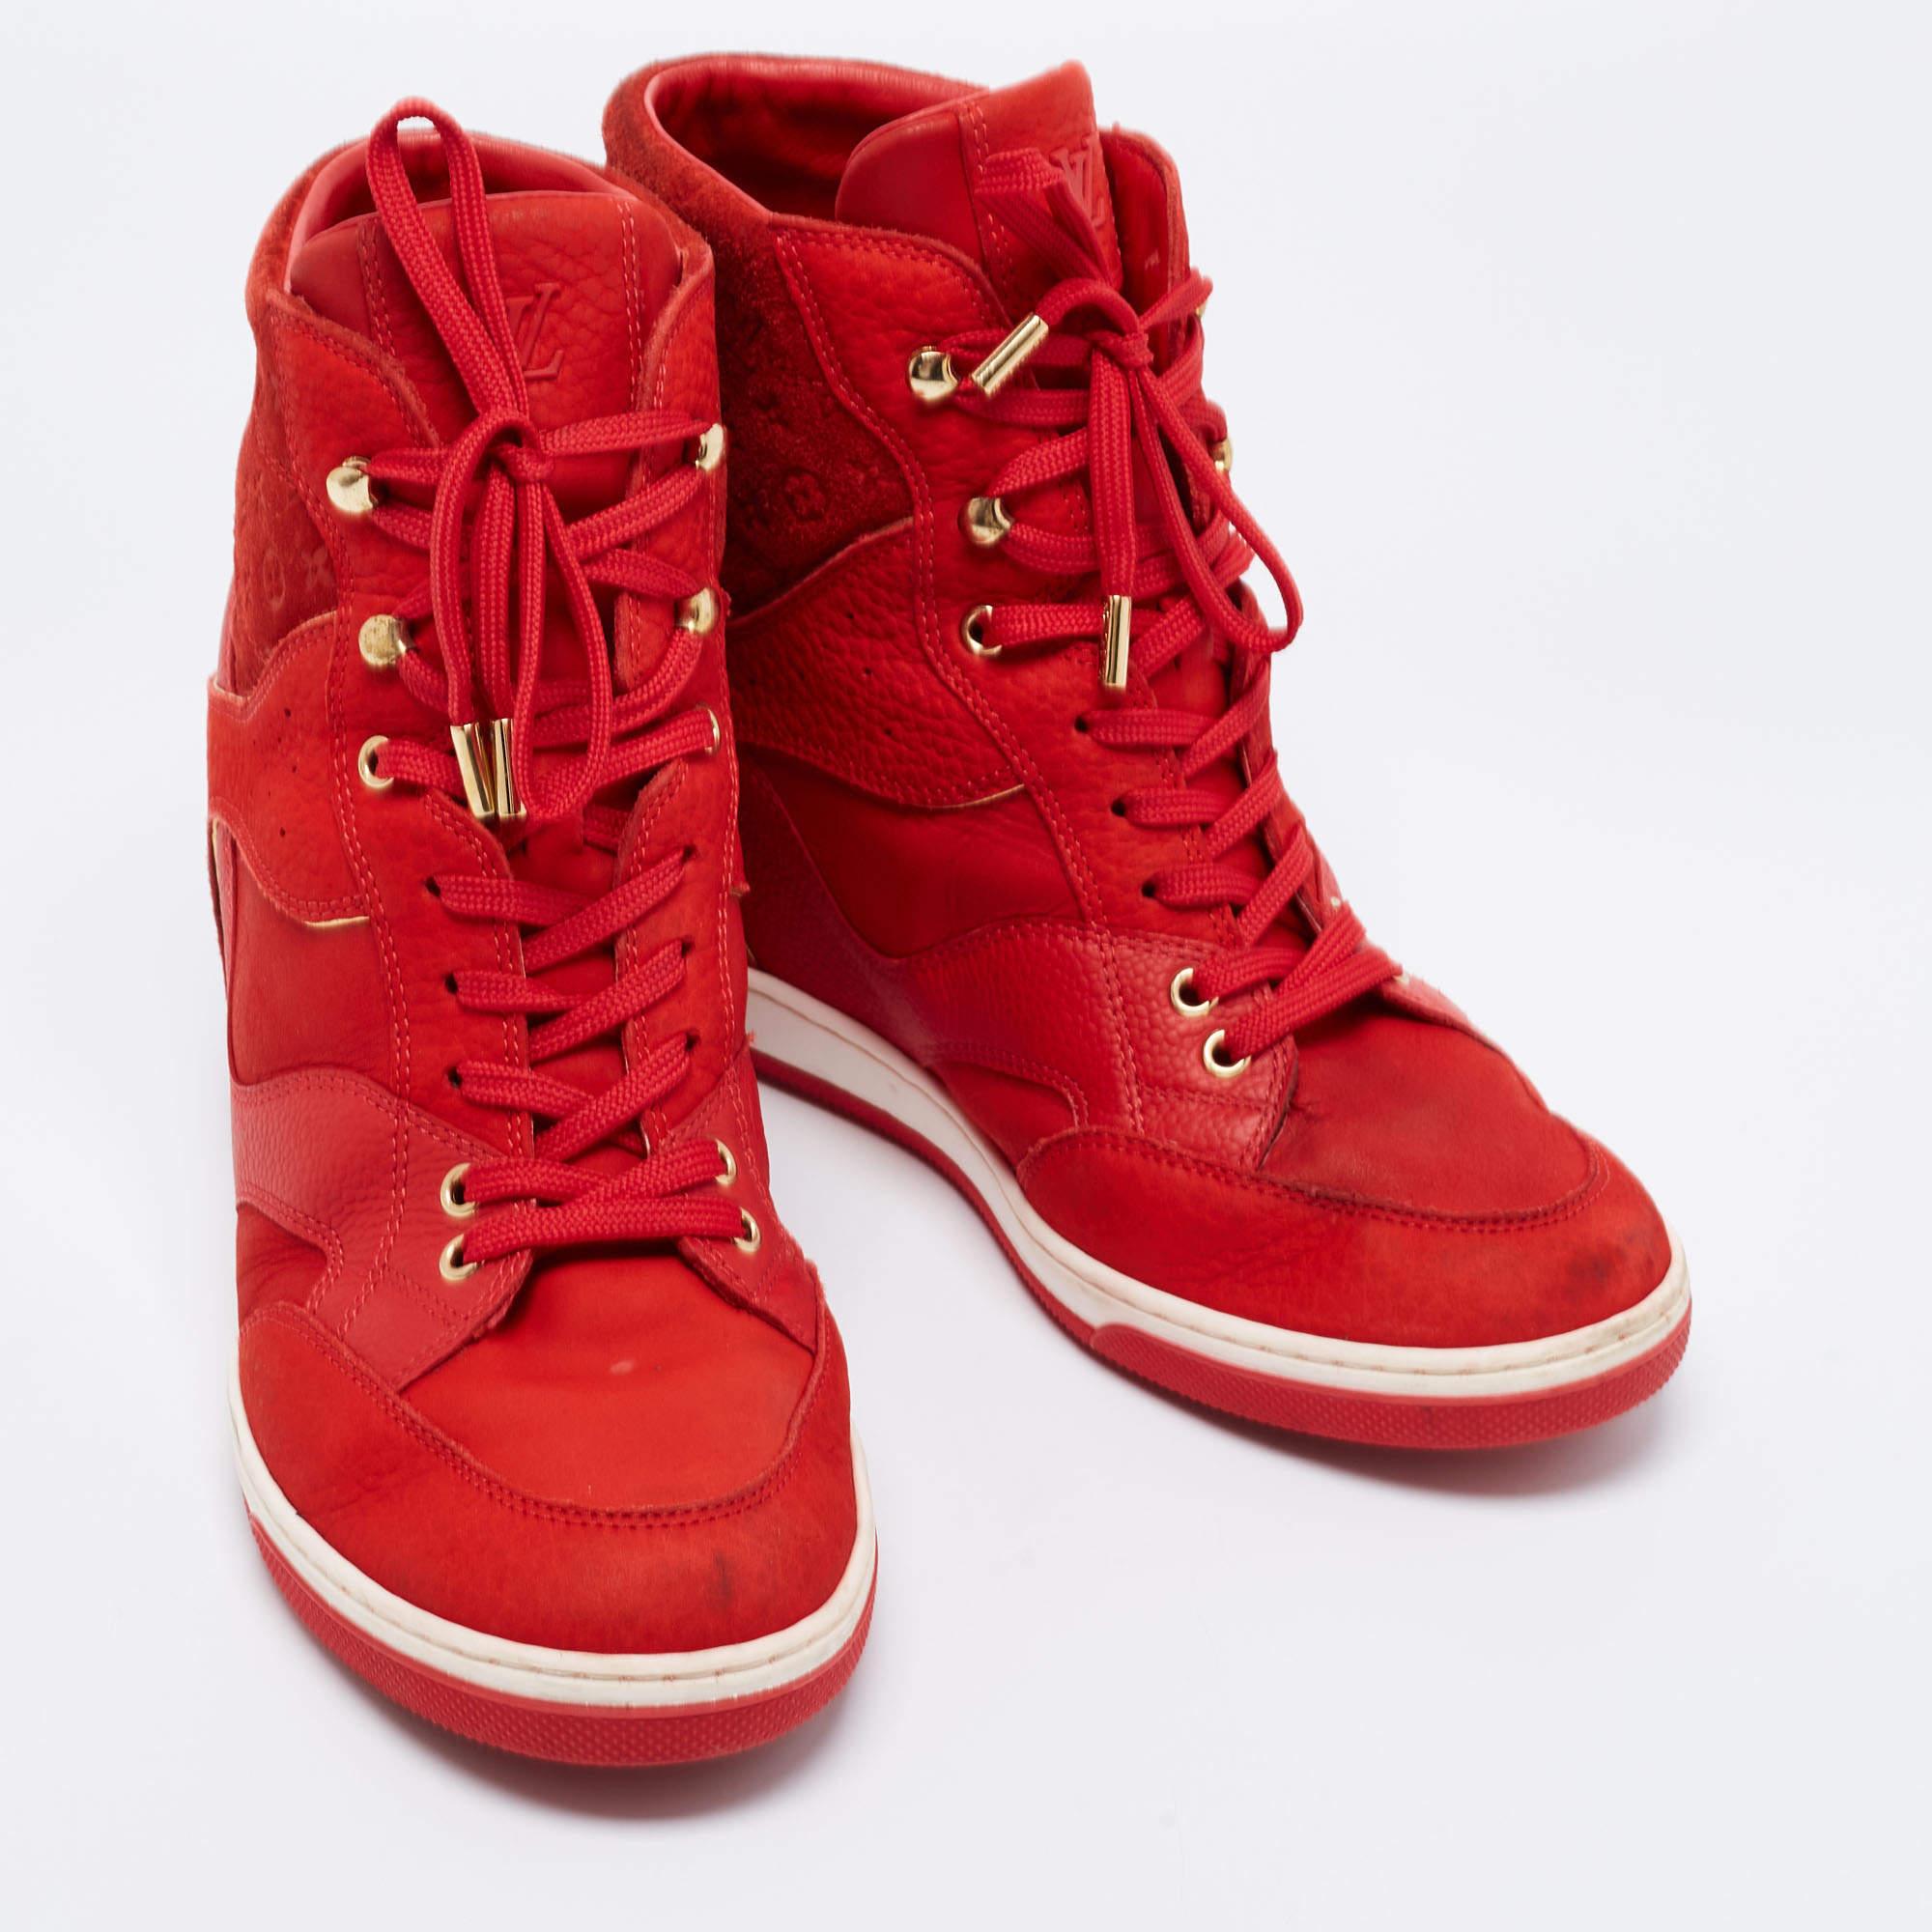 Louis Vuitton Red Leather And Embossed Monogram Suede Millenium Wedge Sneakers S For Sale 1